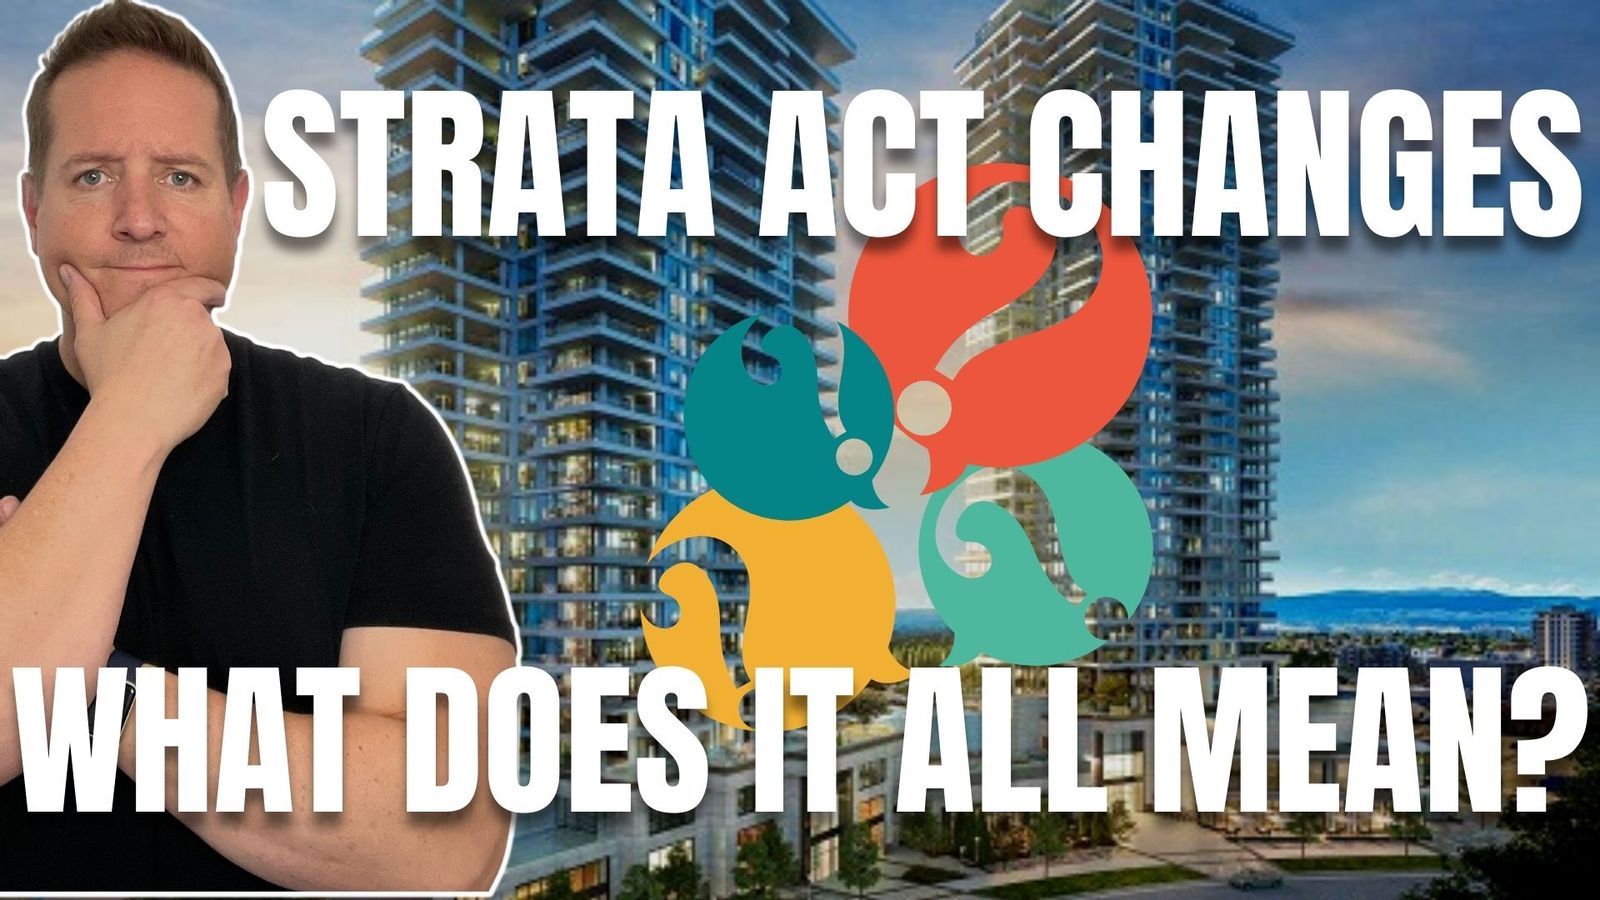 Changes to the BC Strata Property Act: How Will This Impact Kelowna Real Estate?